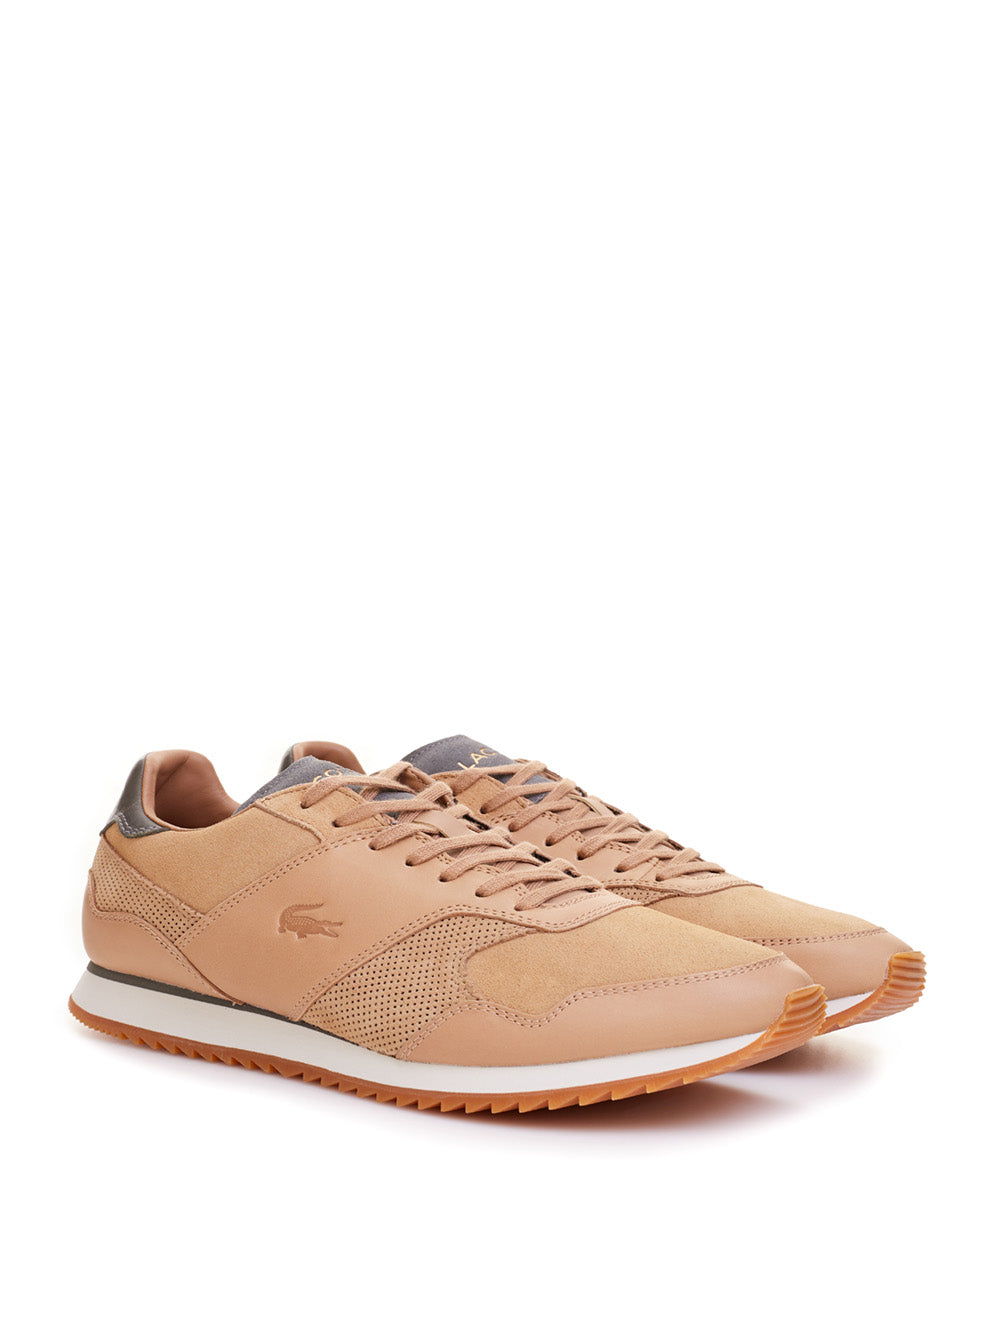 Lacoste Aesthet 120 Camel colored sneakers